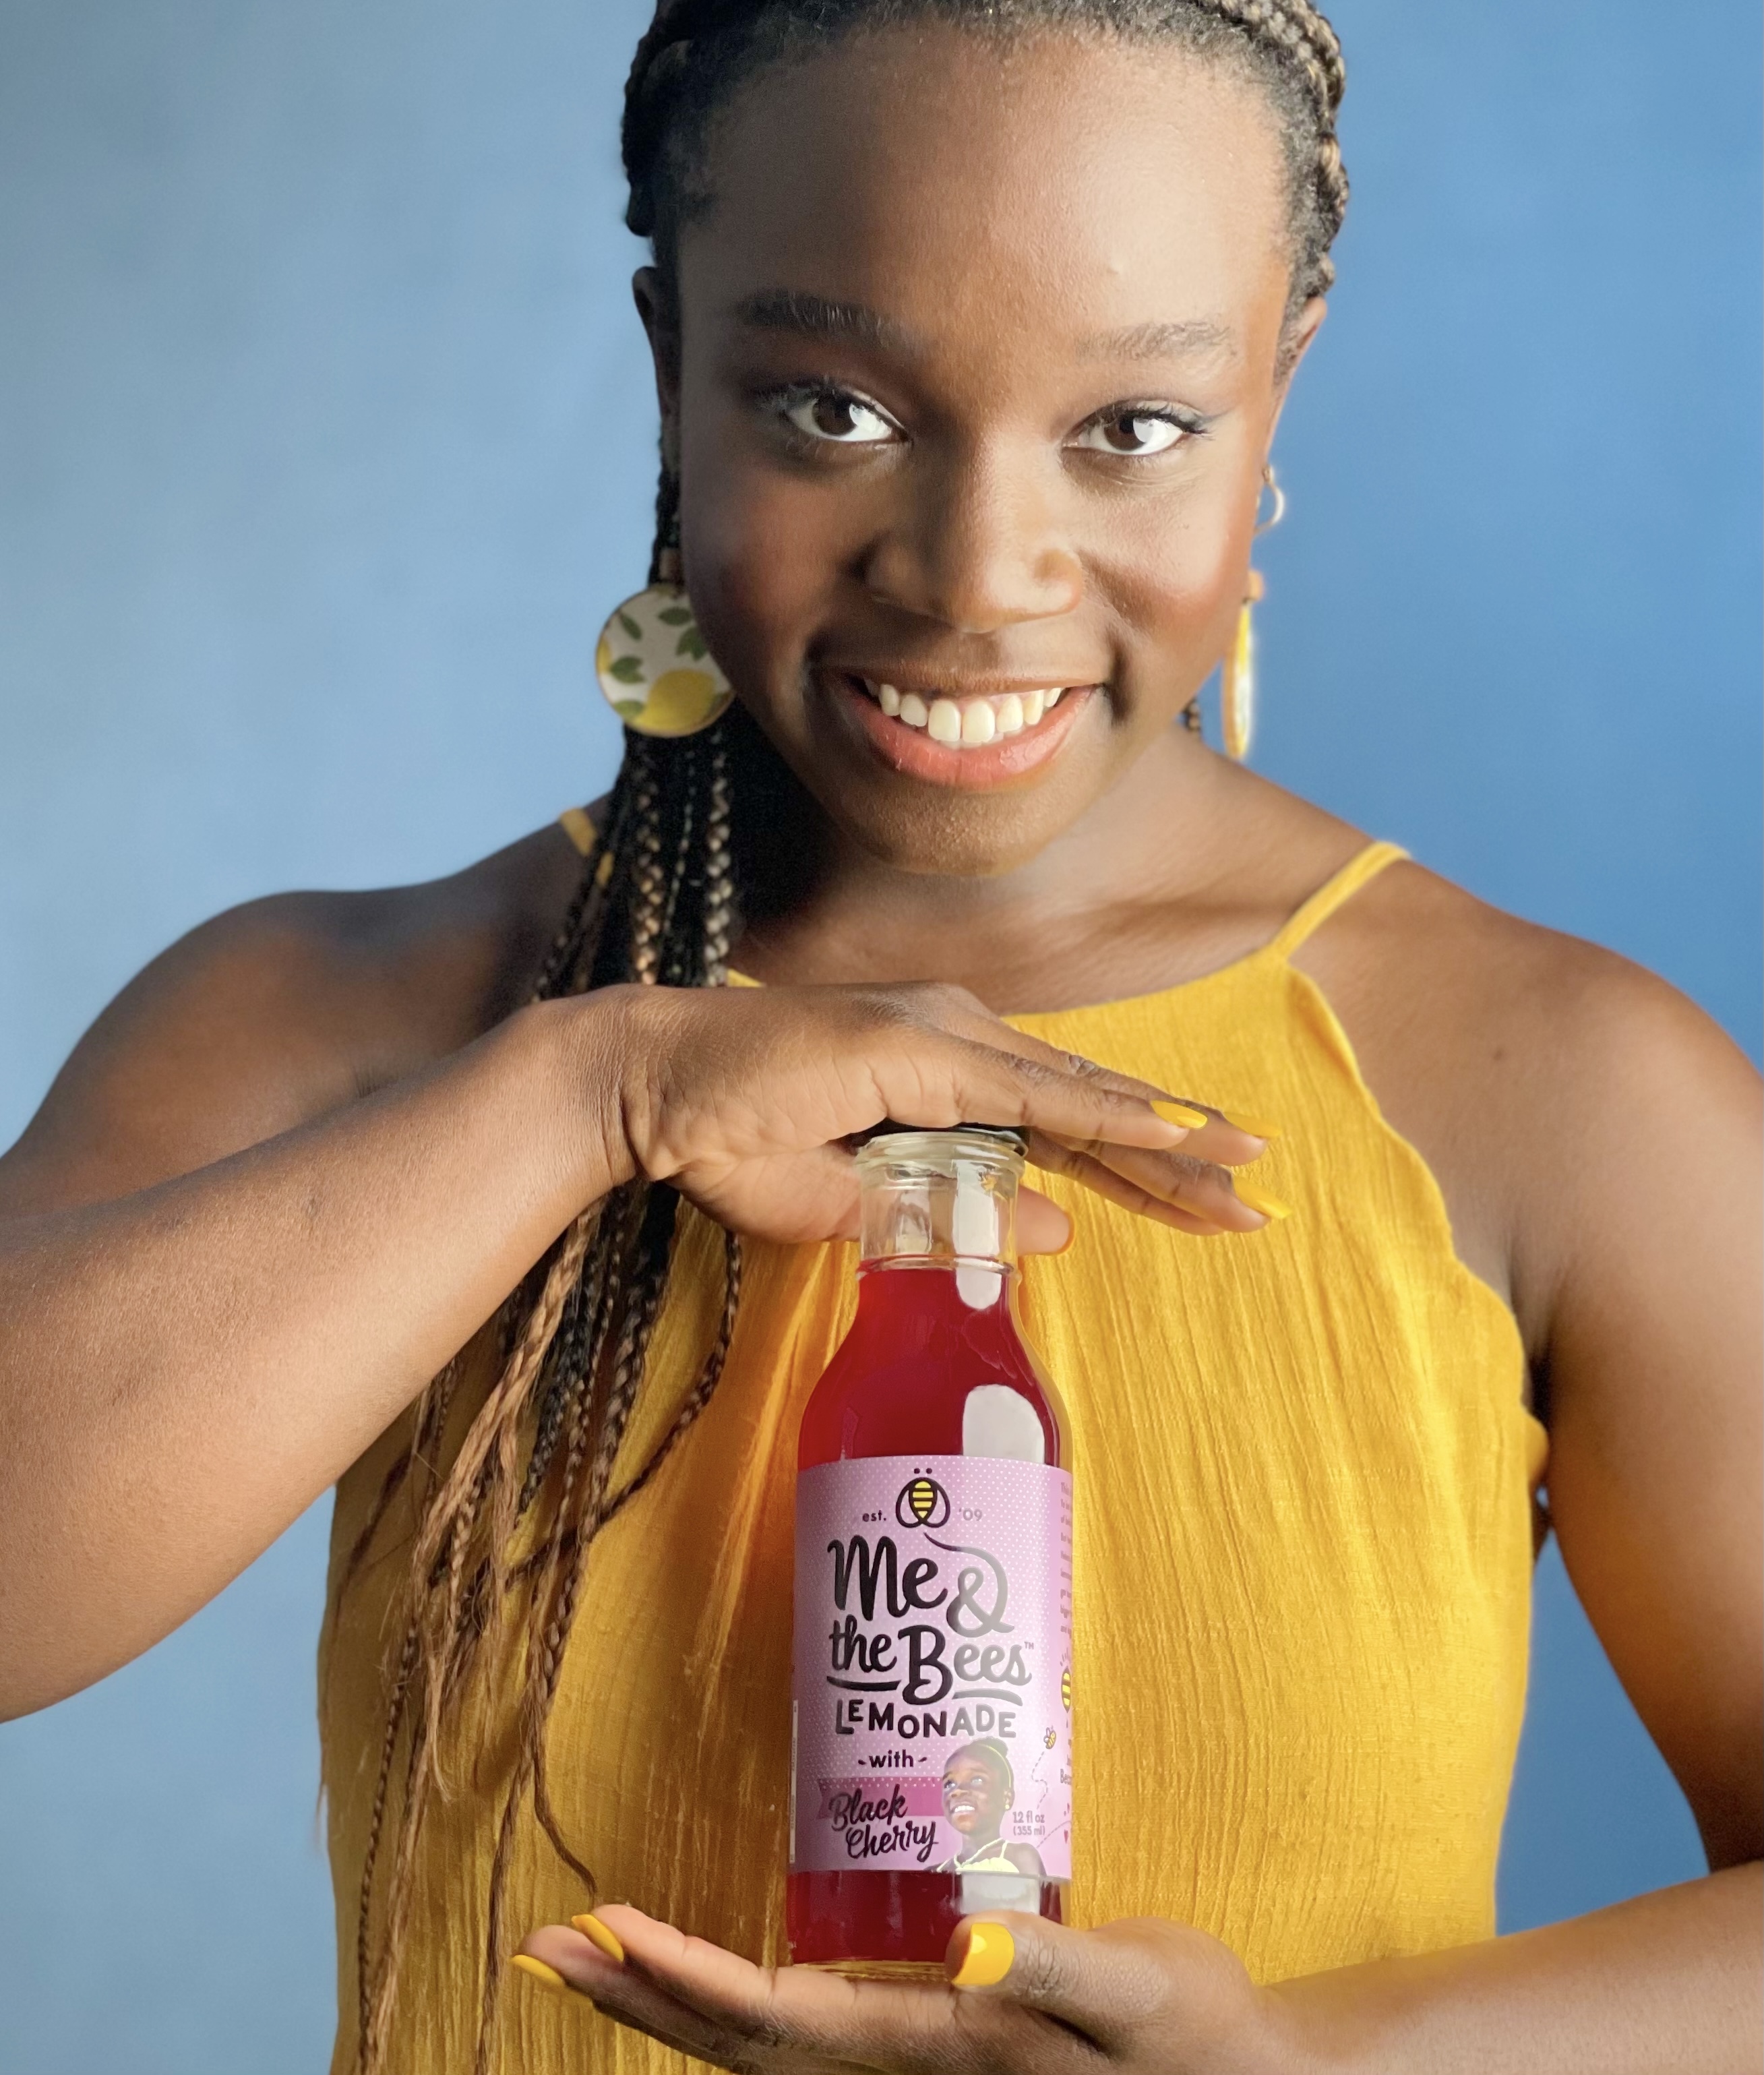 Mikaila Ulmer, founder and CEO of Me & the Bees Lemonade, founded the company at 4 years old and now has her products in all 50 states.